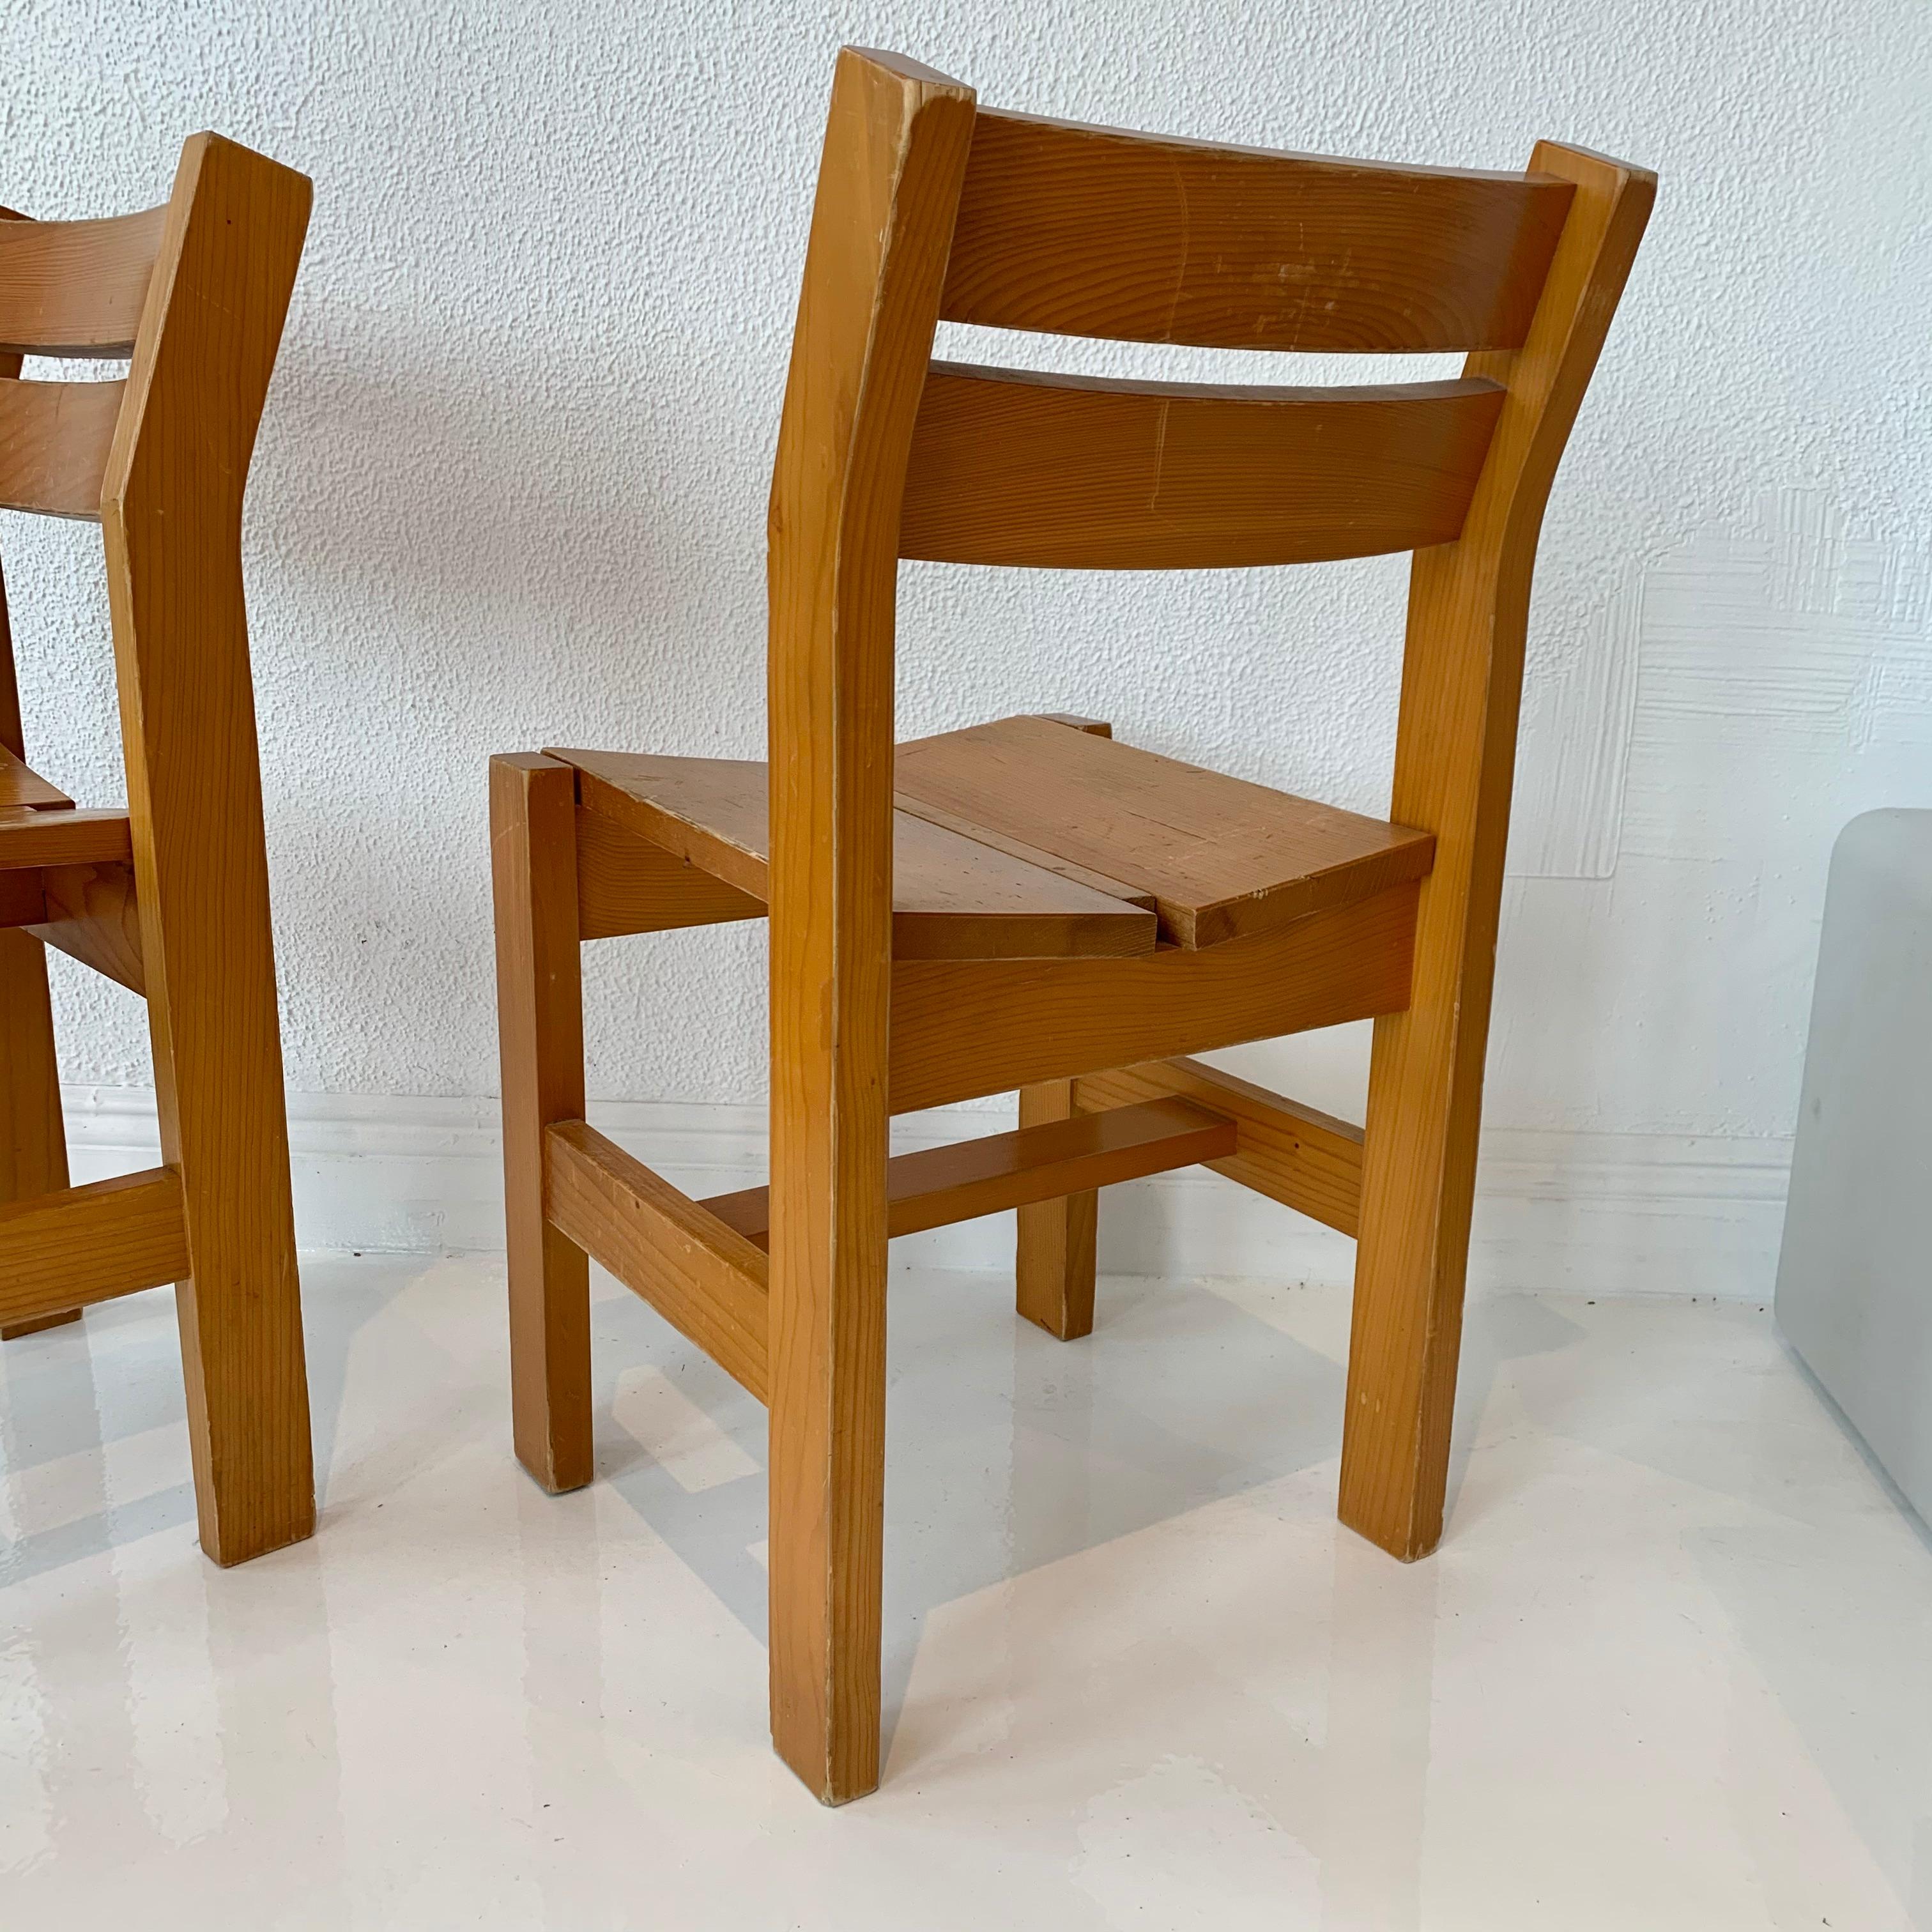 Mid-20th Century Charlotte Perriand Chairs from 